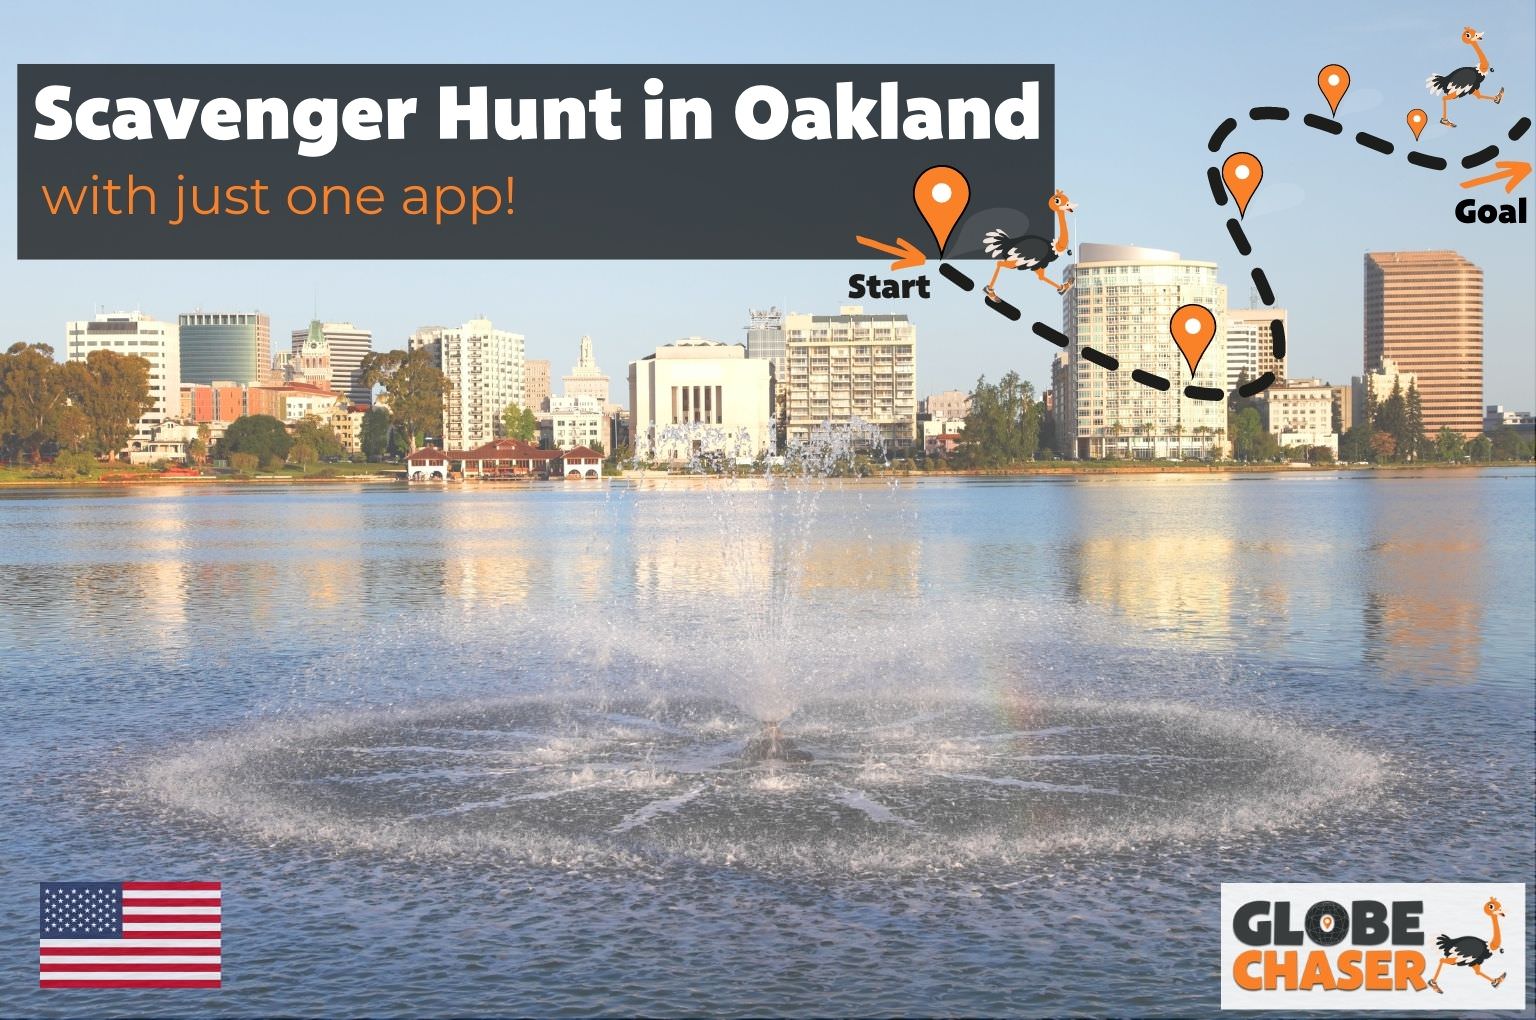 Scavenger Hunt in Oakland, USA - Family Activities with the Globe Chaser App for Outdoor Fun